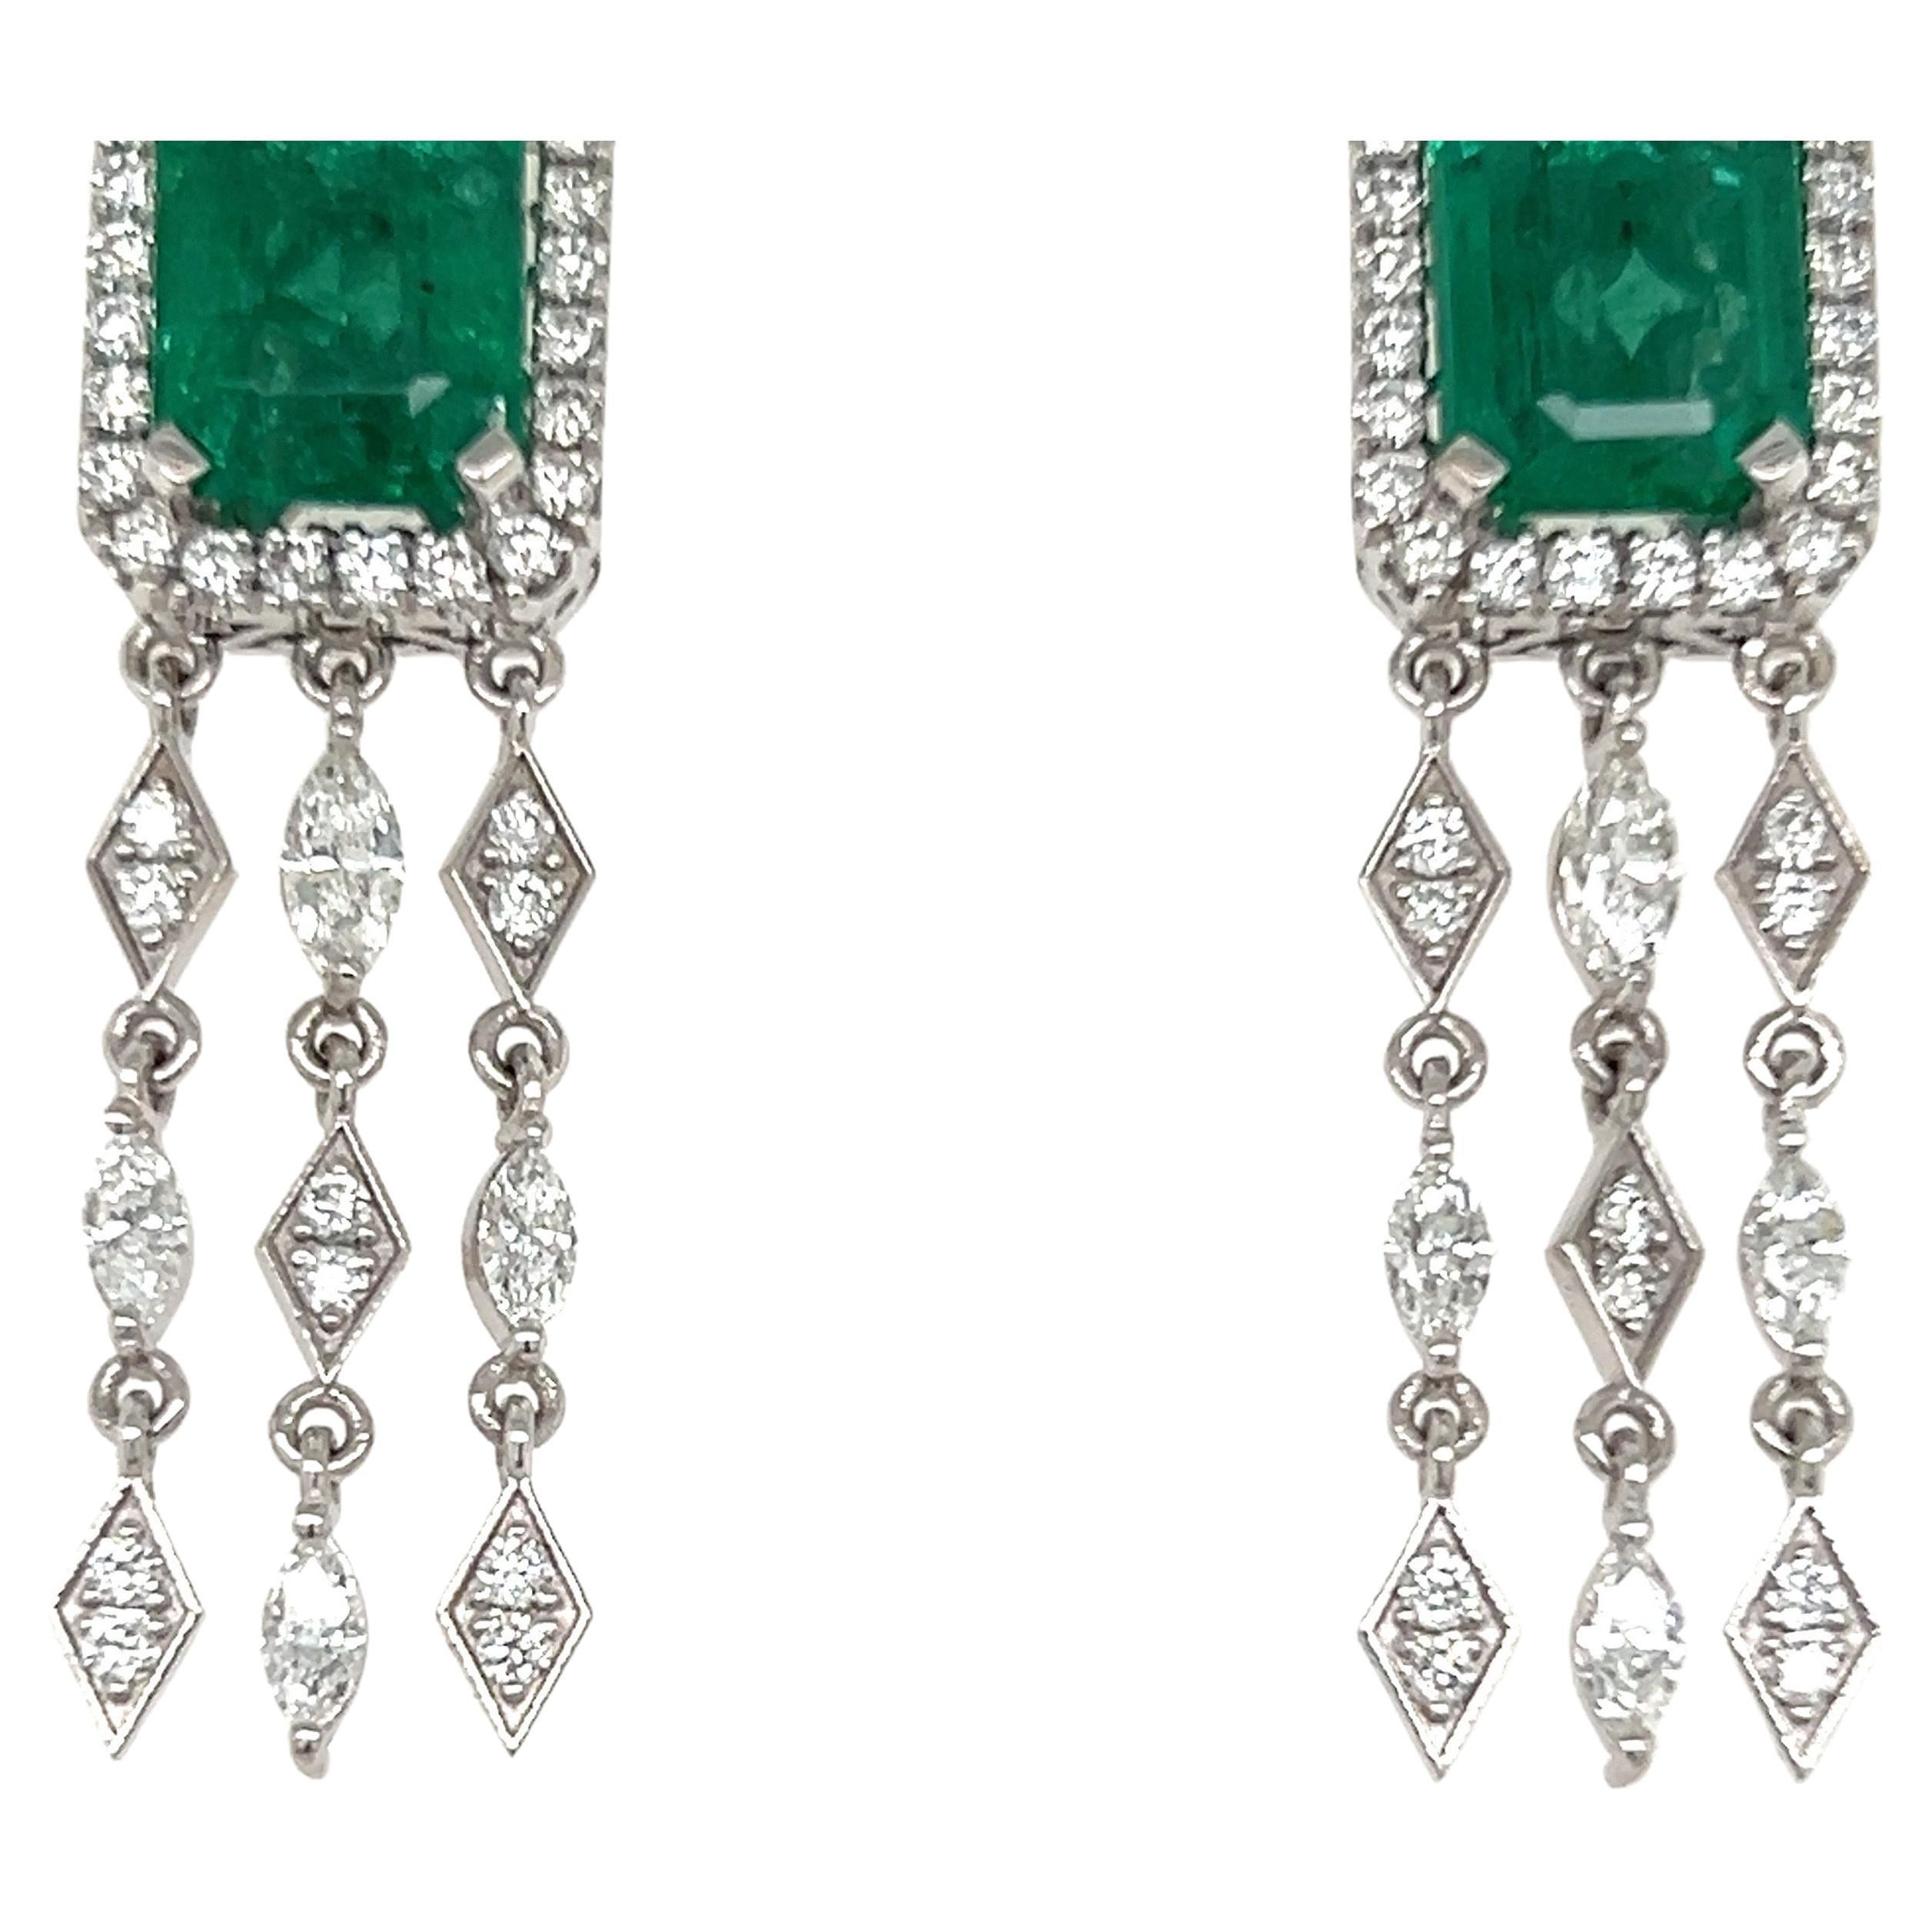 Glamorous dangling emerald earrings. High brilliance with rich grass green tone two matching 5.92 carat emerald cut natural emeralds encased in basket mounting with four bead prongs, accented with round brilliant cut diamonds. Handcrafted dangling